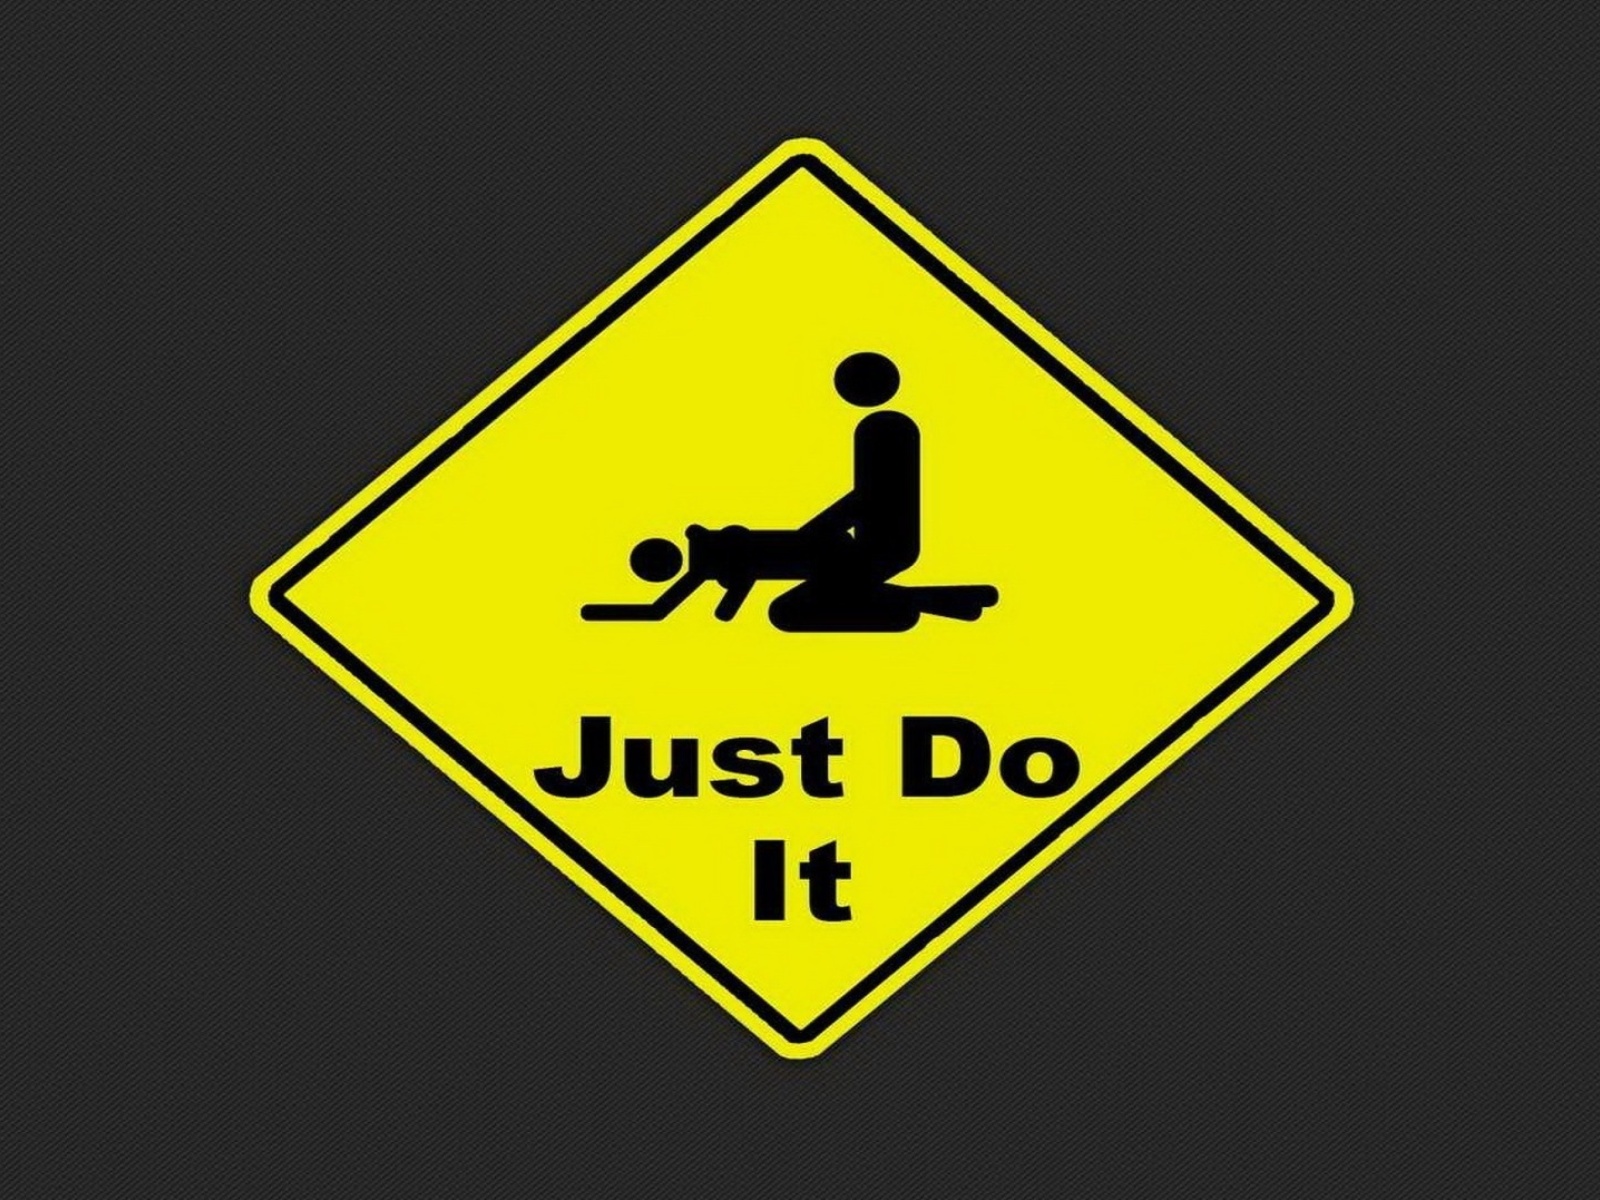 Just Do It Funny Sign screenshot #1 1600x1200